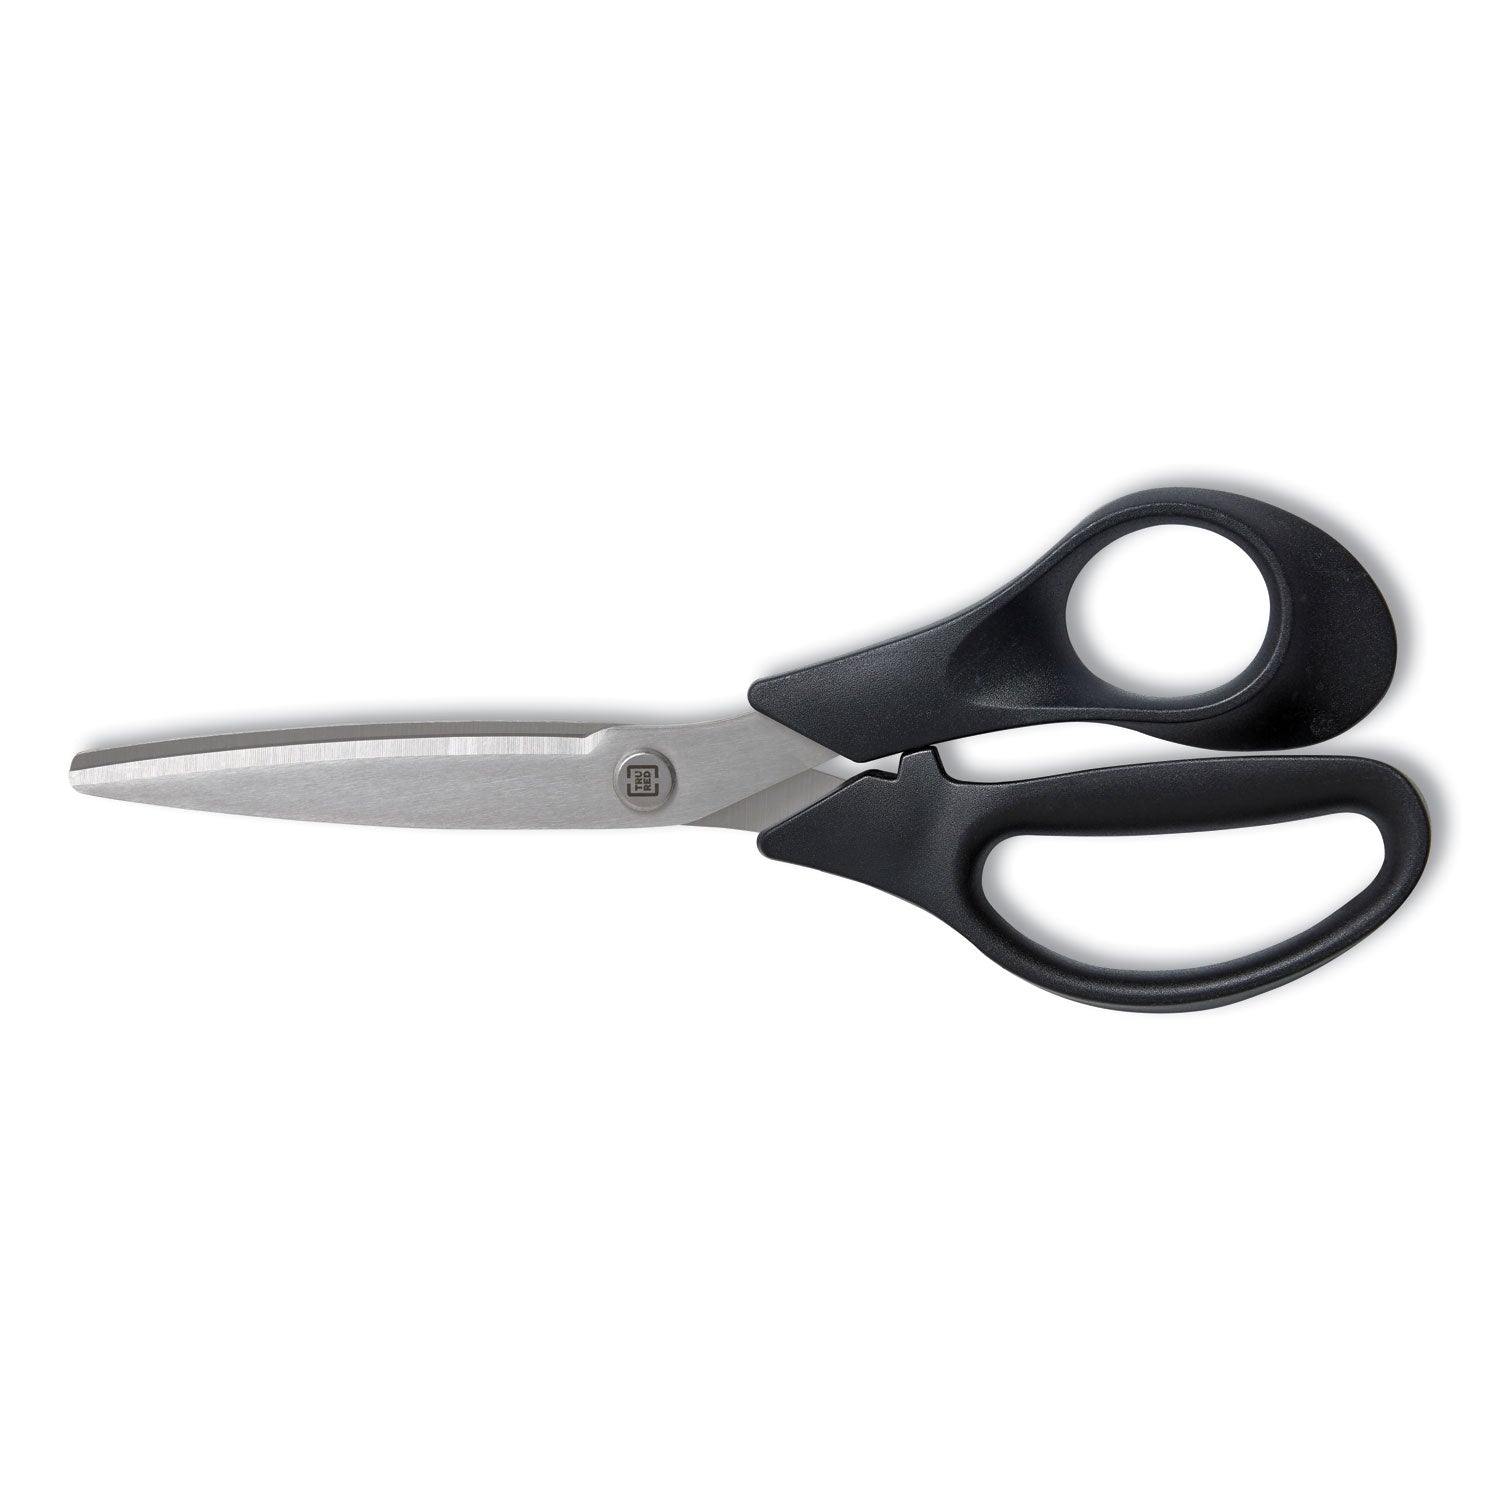 stainless-steel-scissors-8-long-358-cut-length-assorted-straight-handles-2-pack_tud24380494 - 2